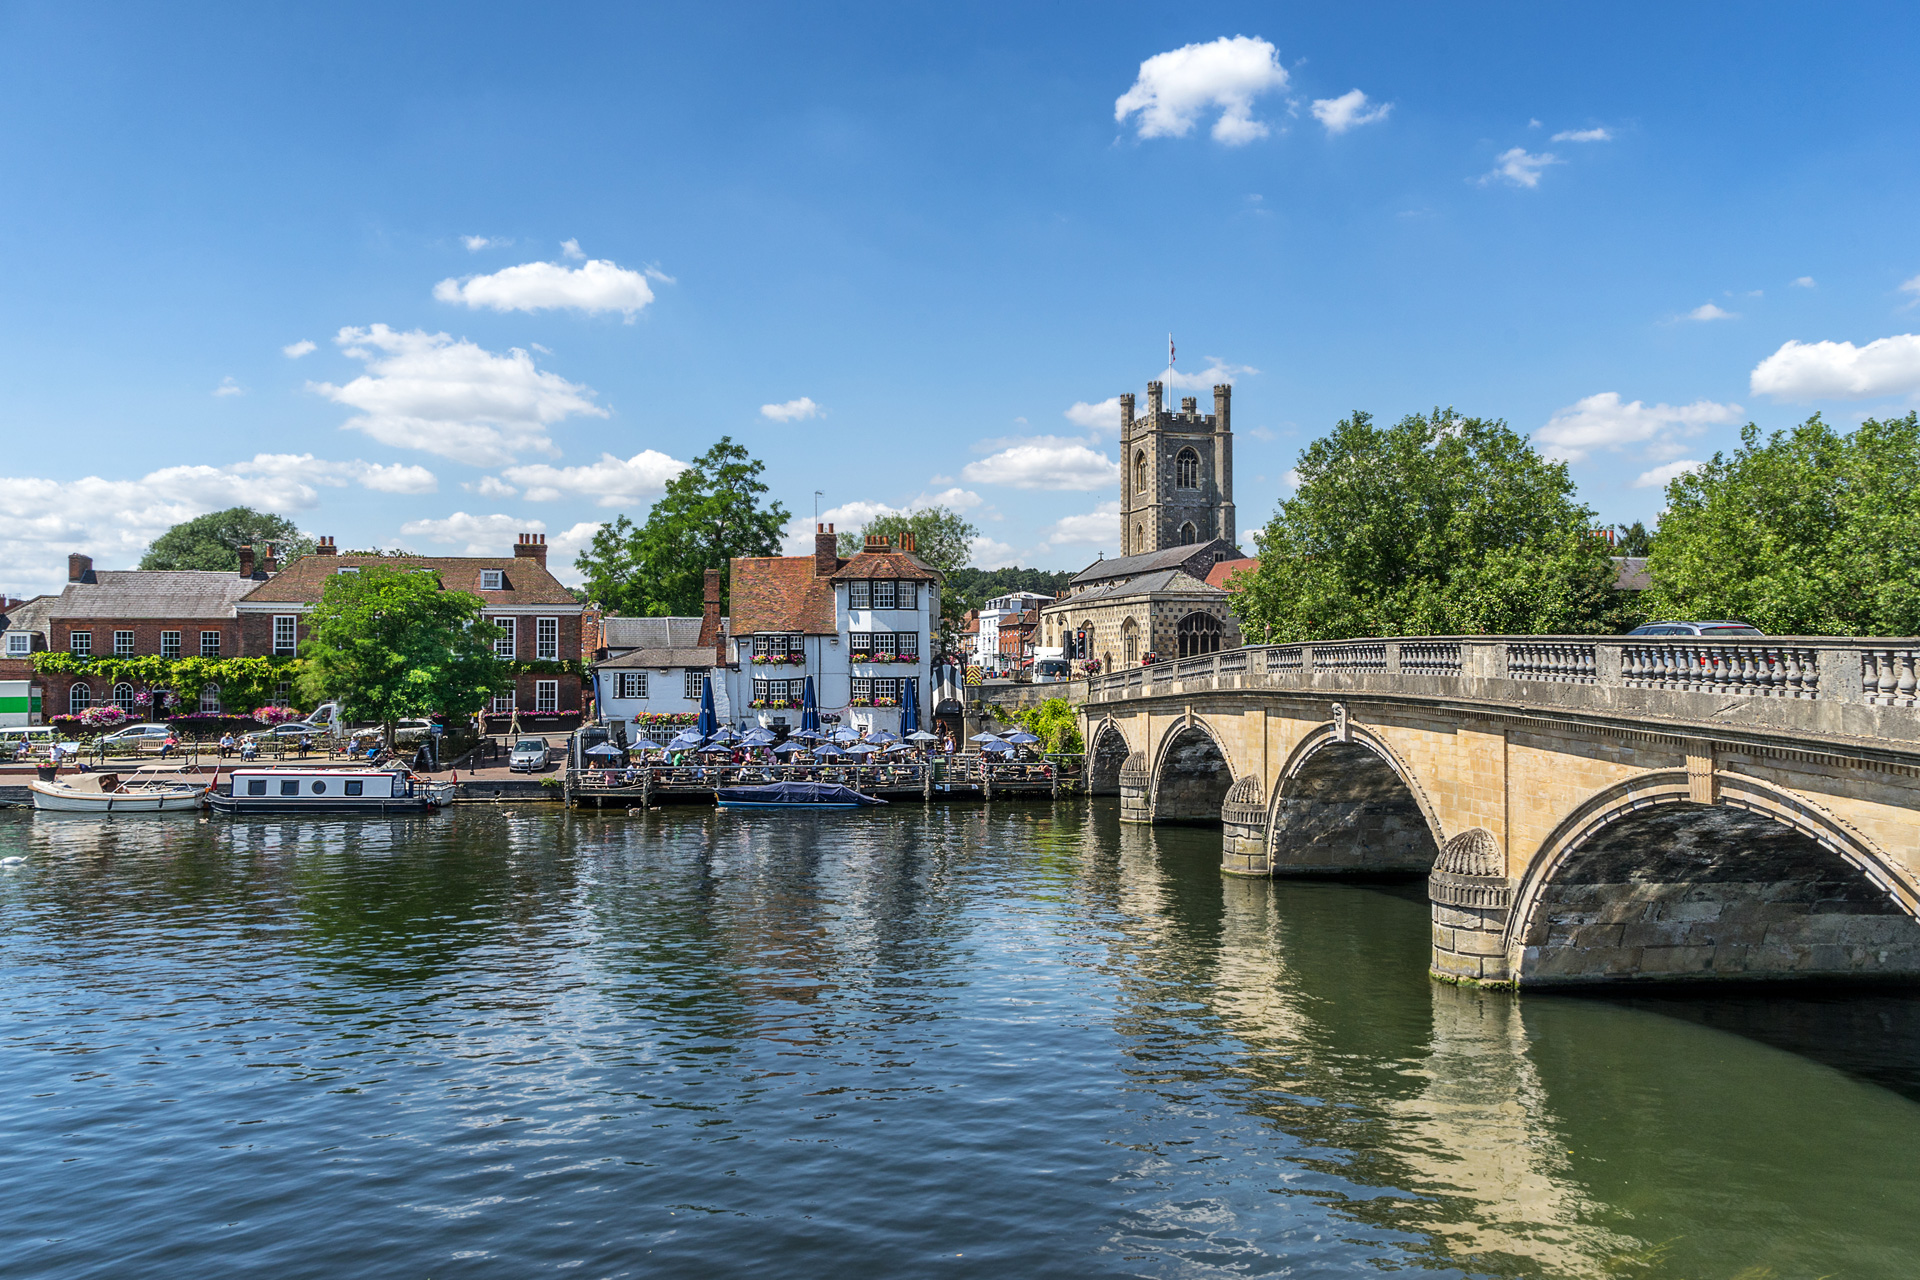 The river in Henley on Thames in London